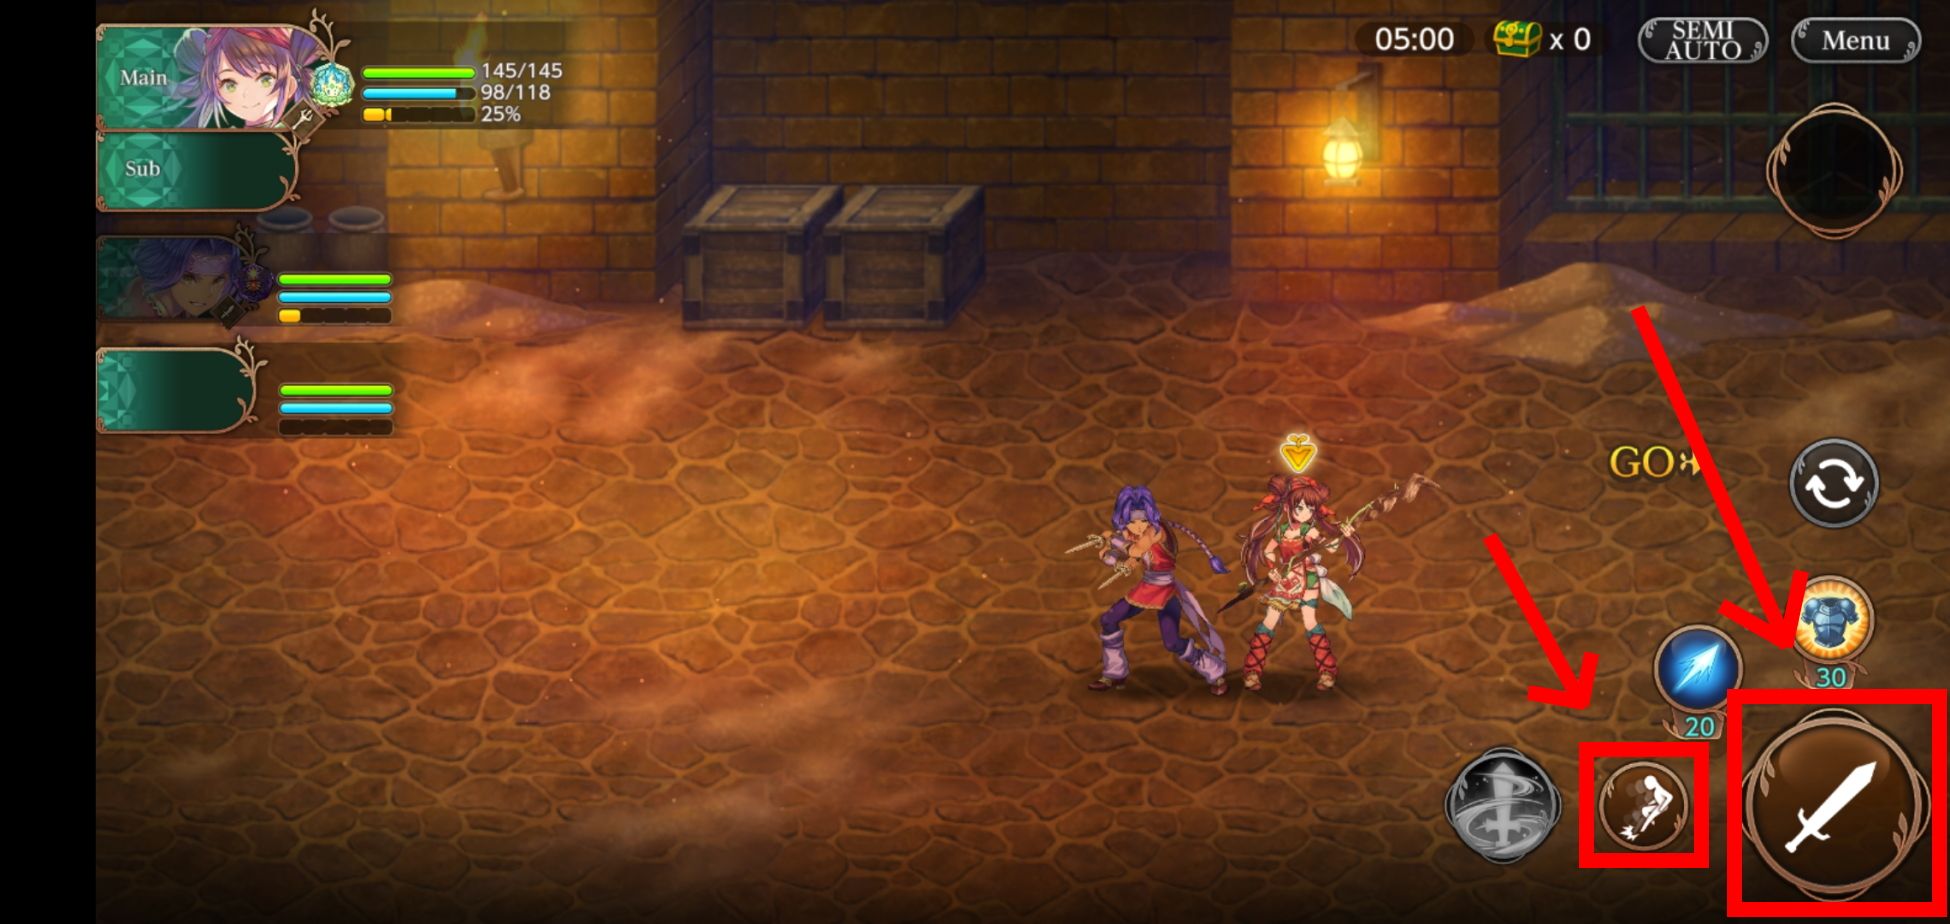 Normal attacks and evade buttons in Echoes of Mana